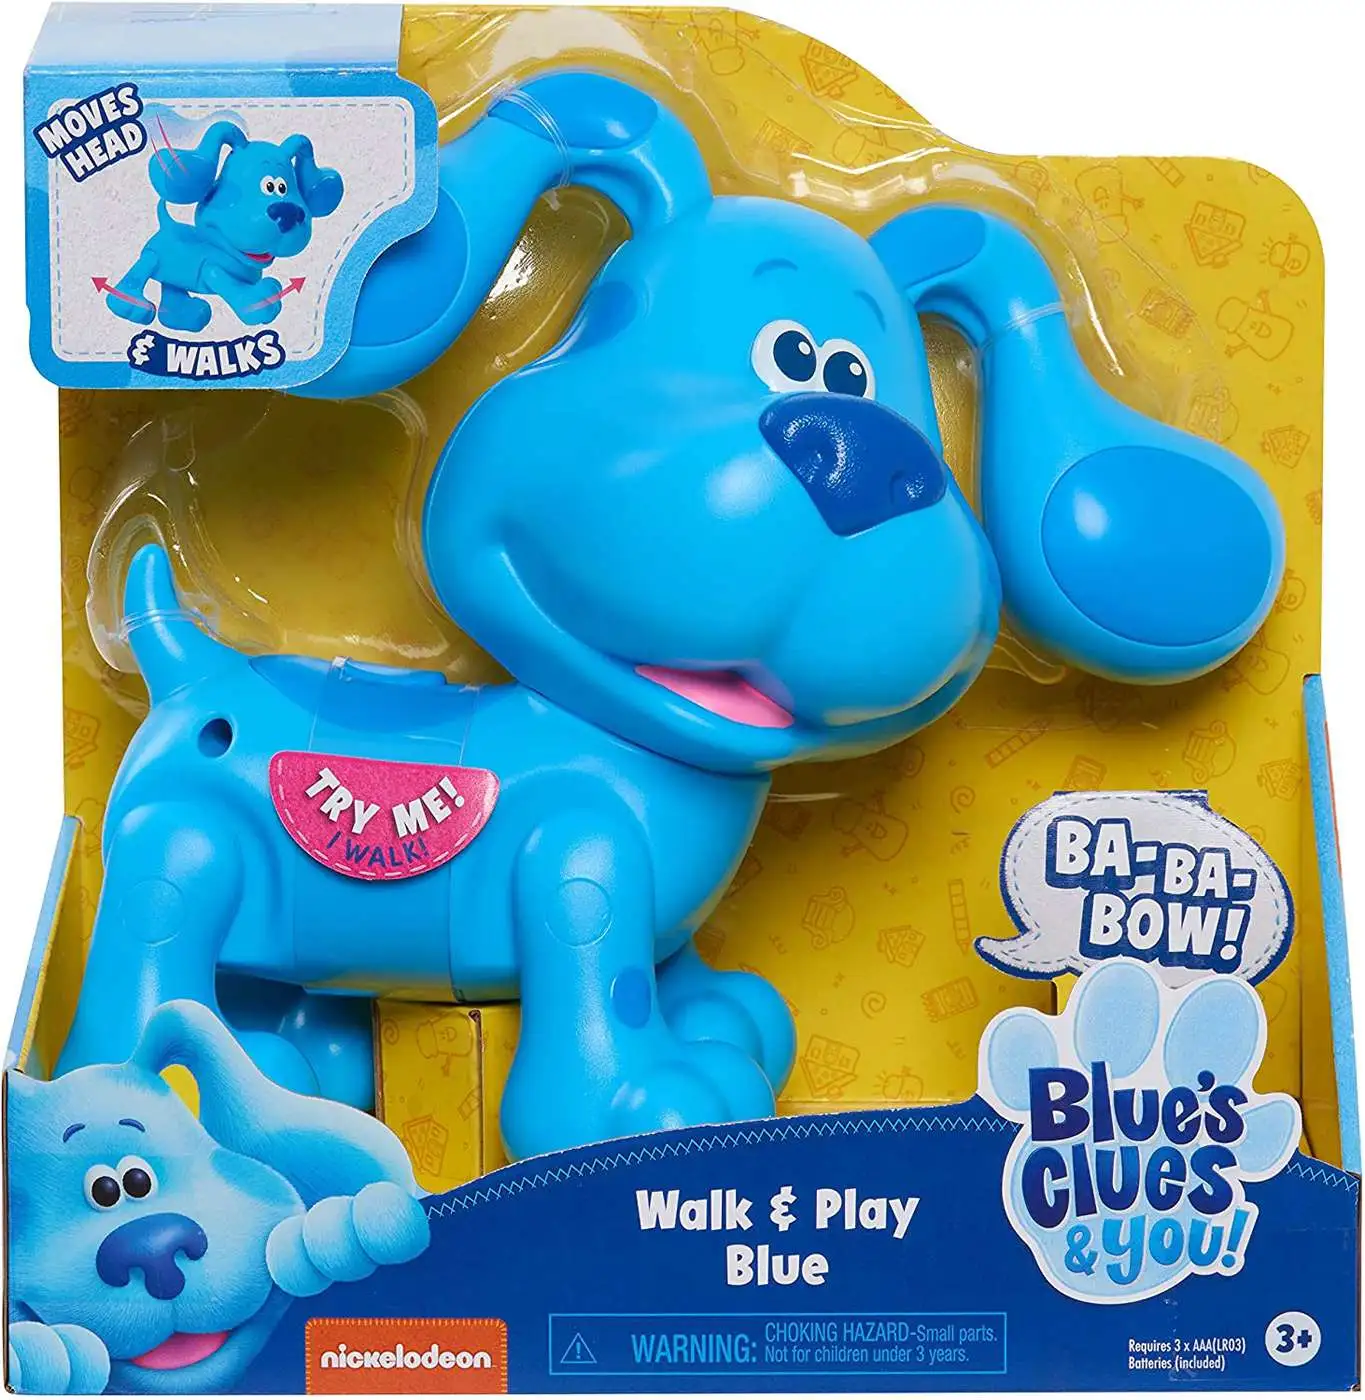 New Blues Clues Deluxe Water Squirter Set Bath Toy by Just Play